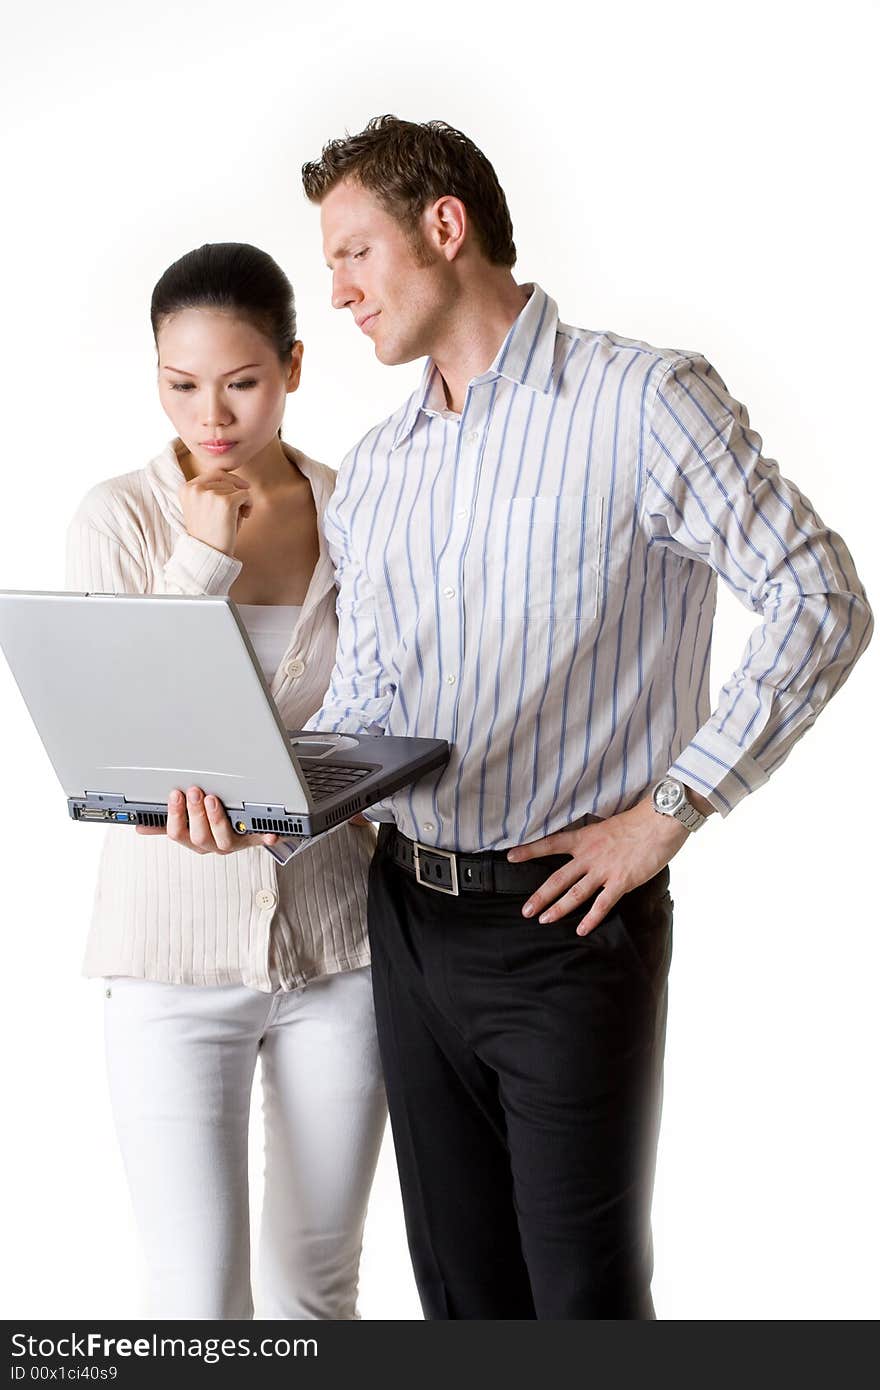 A businesswoman and businessman get thier mind focused on an important document from their notebook. A businesswoman and businessman get thier mind focused on an important document from their notebook